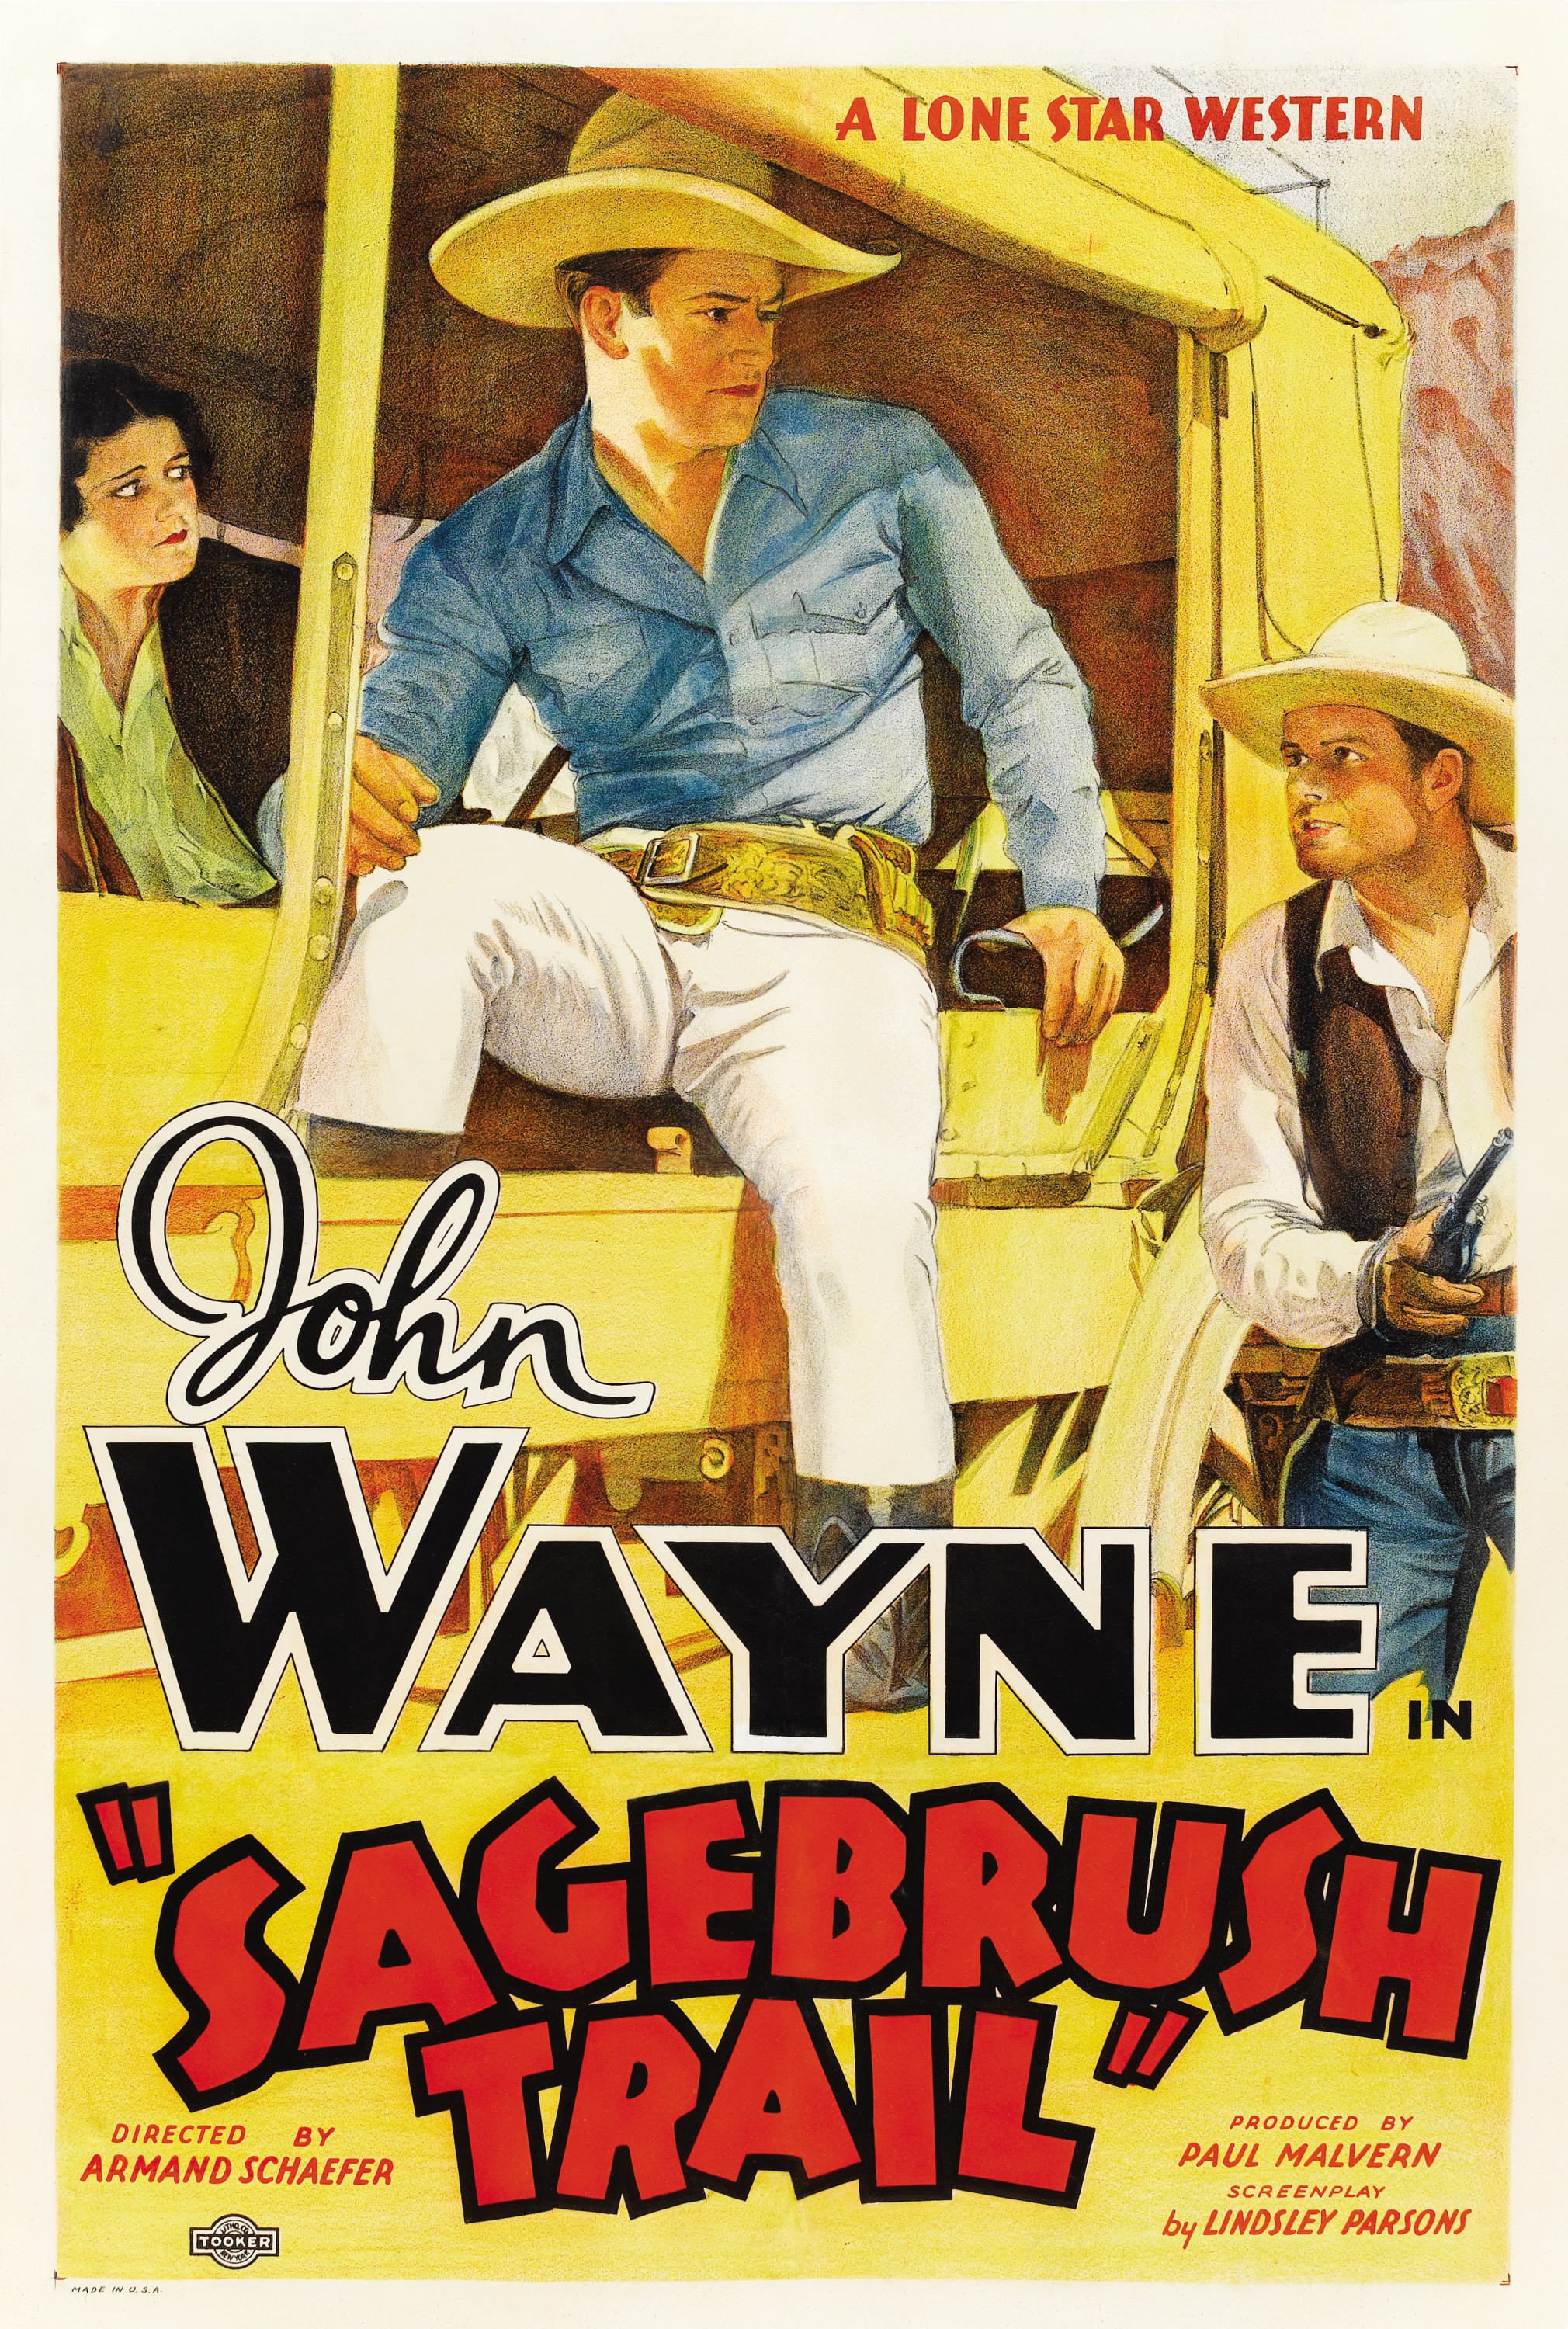 Poster for the movie "Sagebrush Trail"